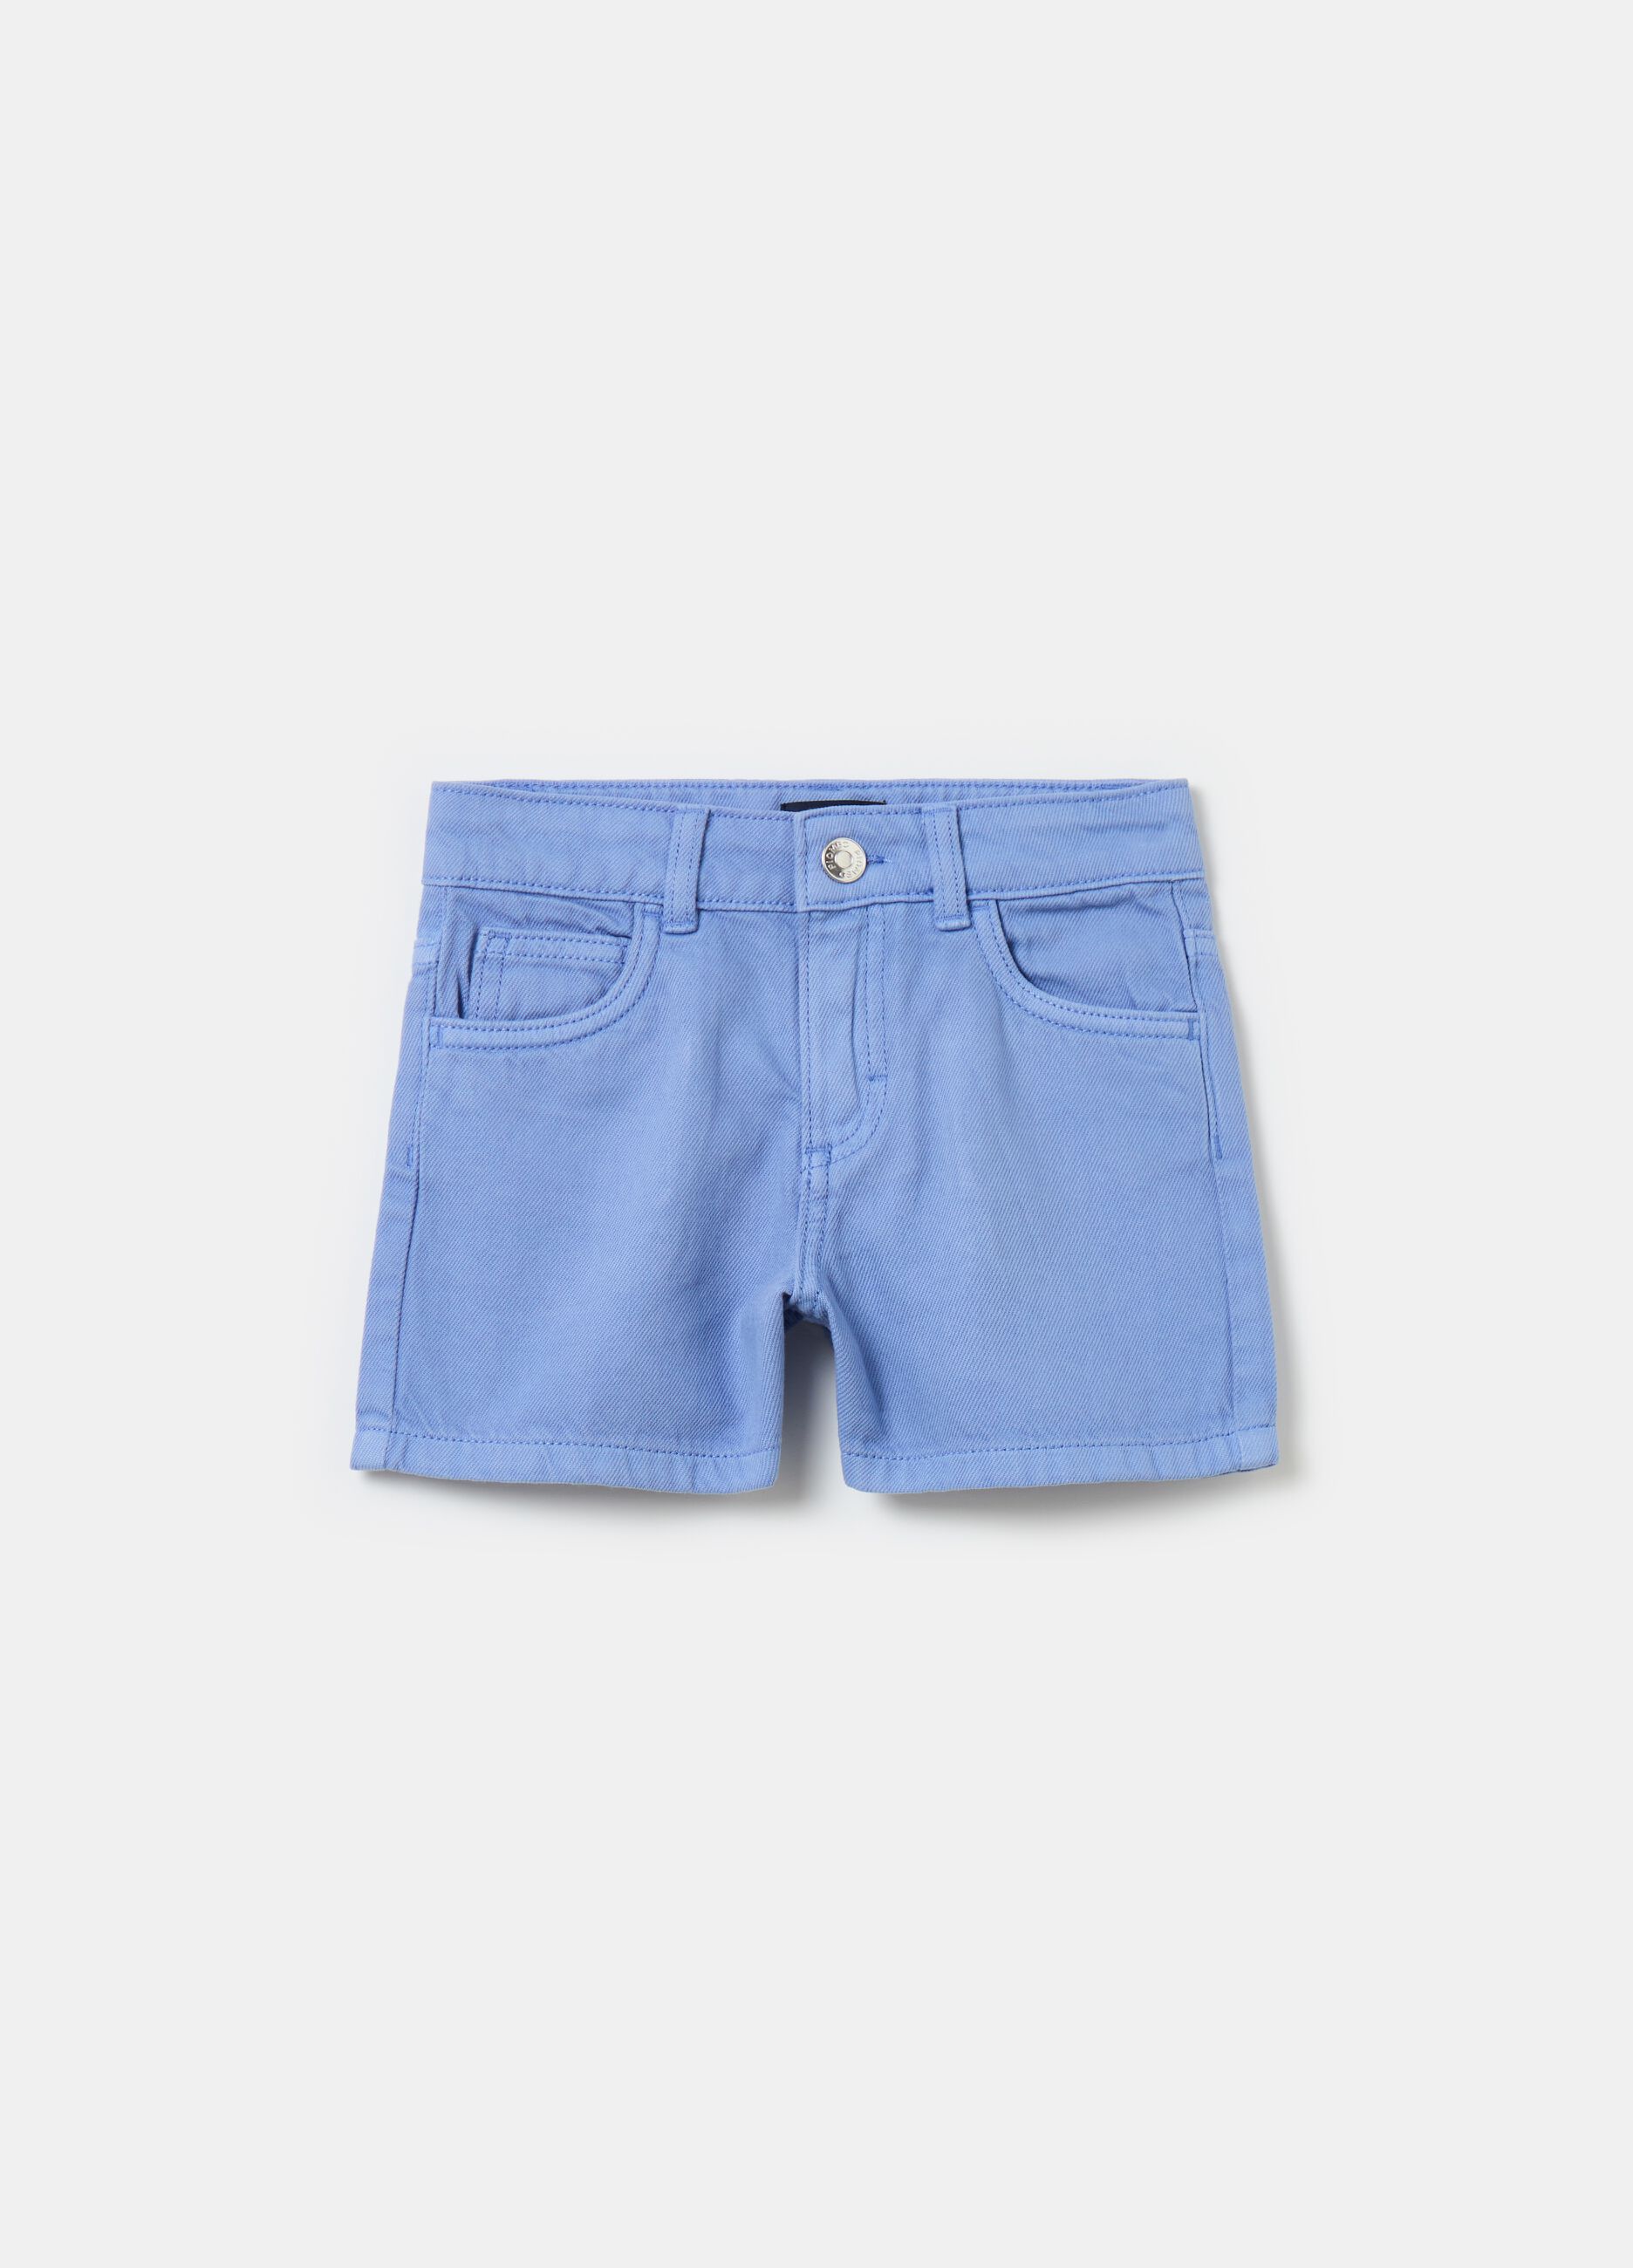 Drill shorts with five pockets